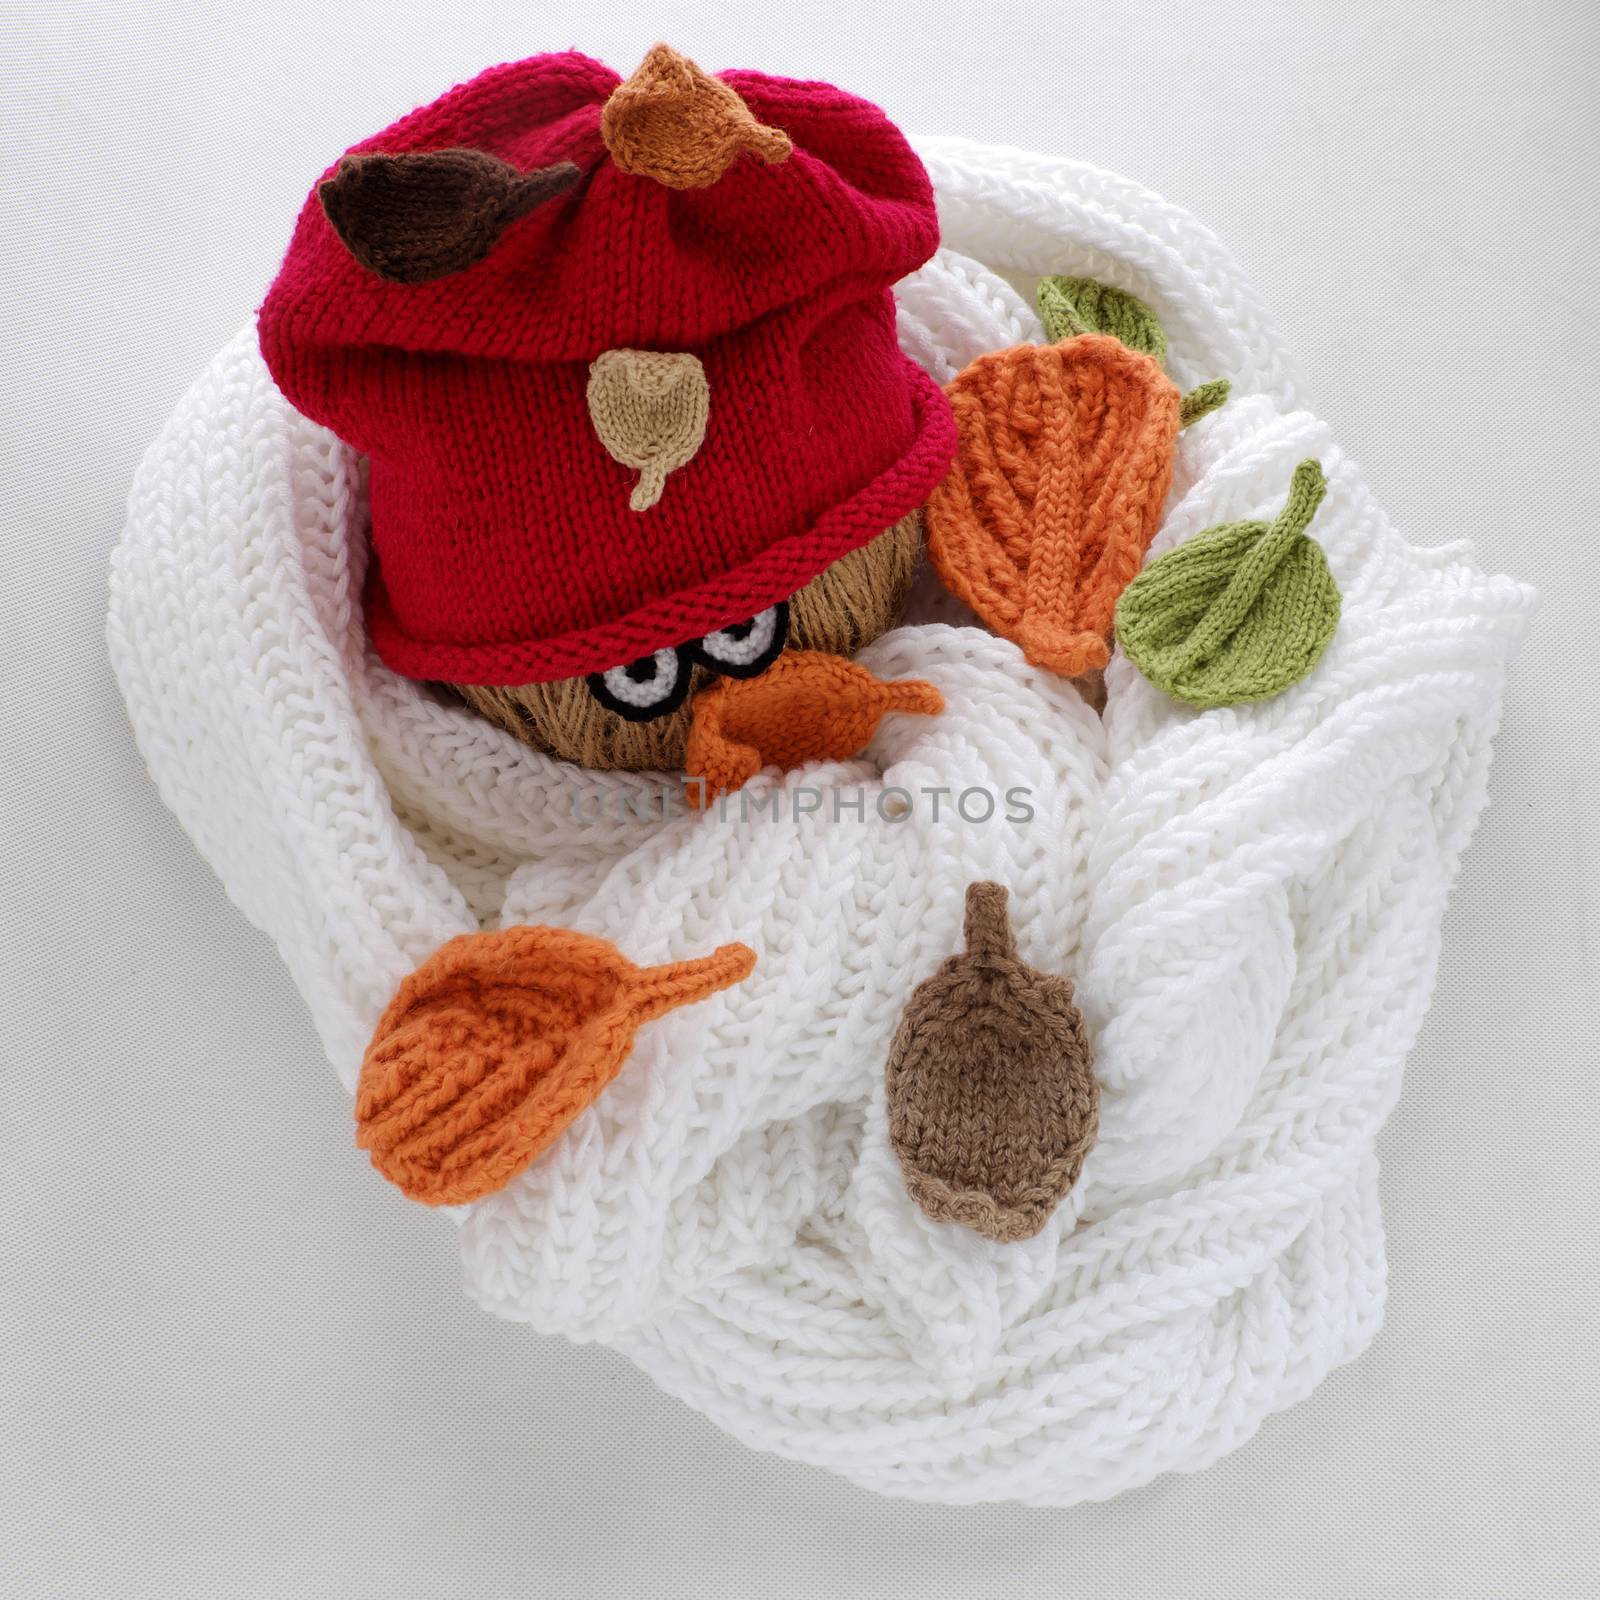 Christmas snowman from white scarf, red hat and leaf by xuanhuongho